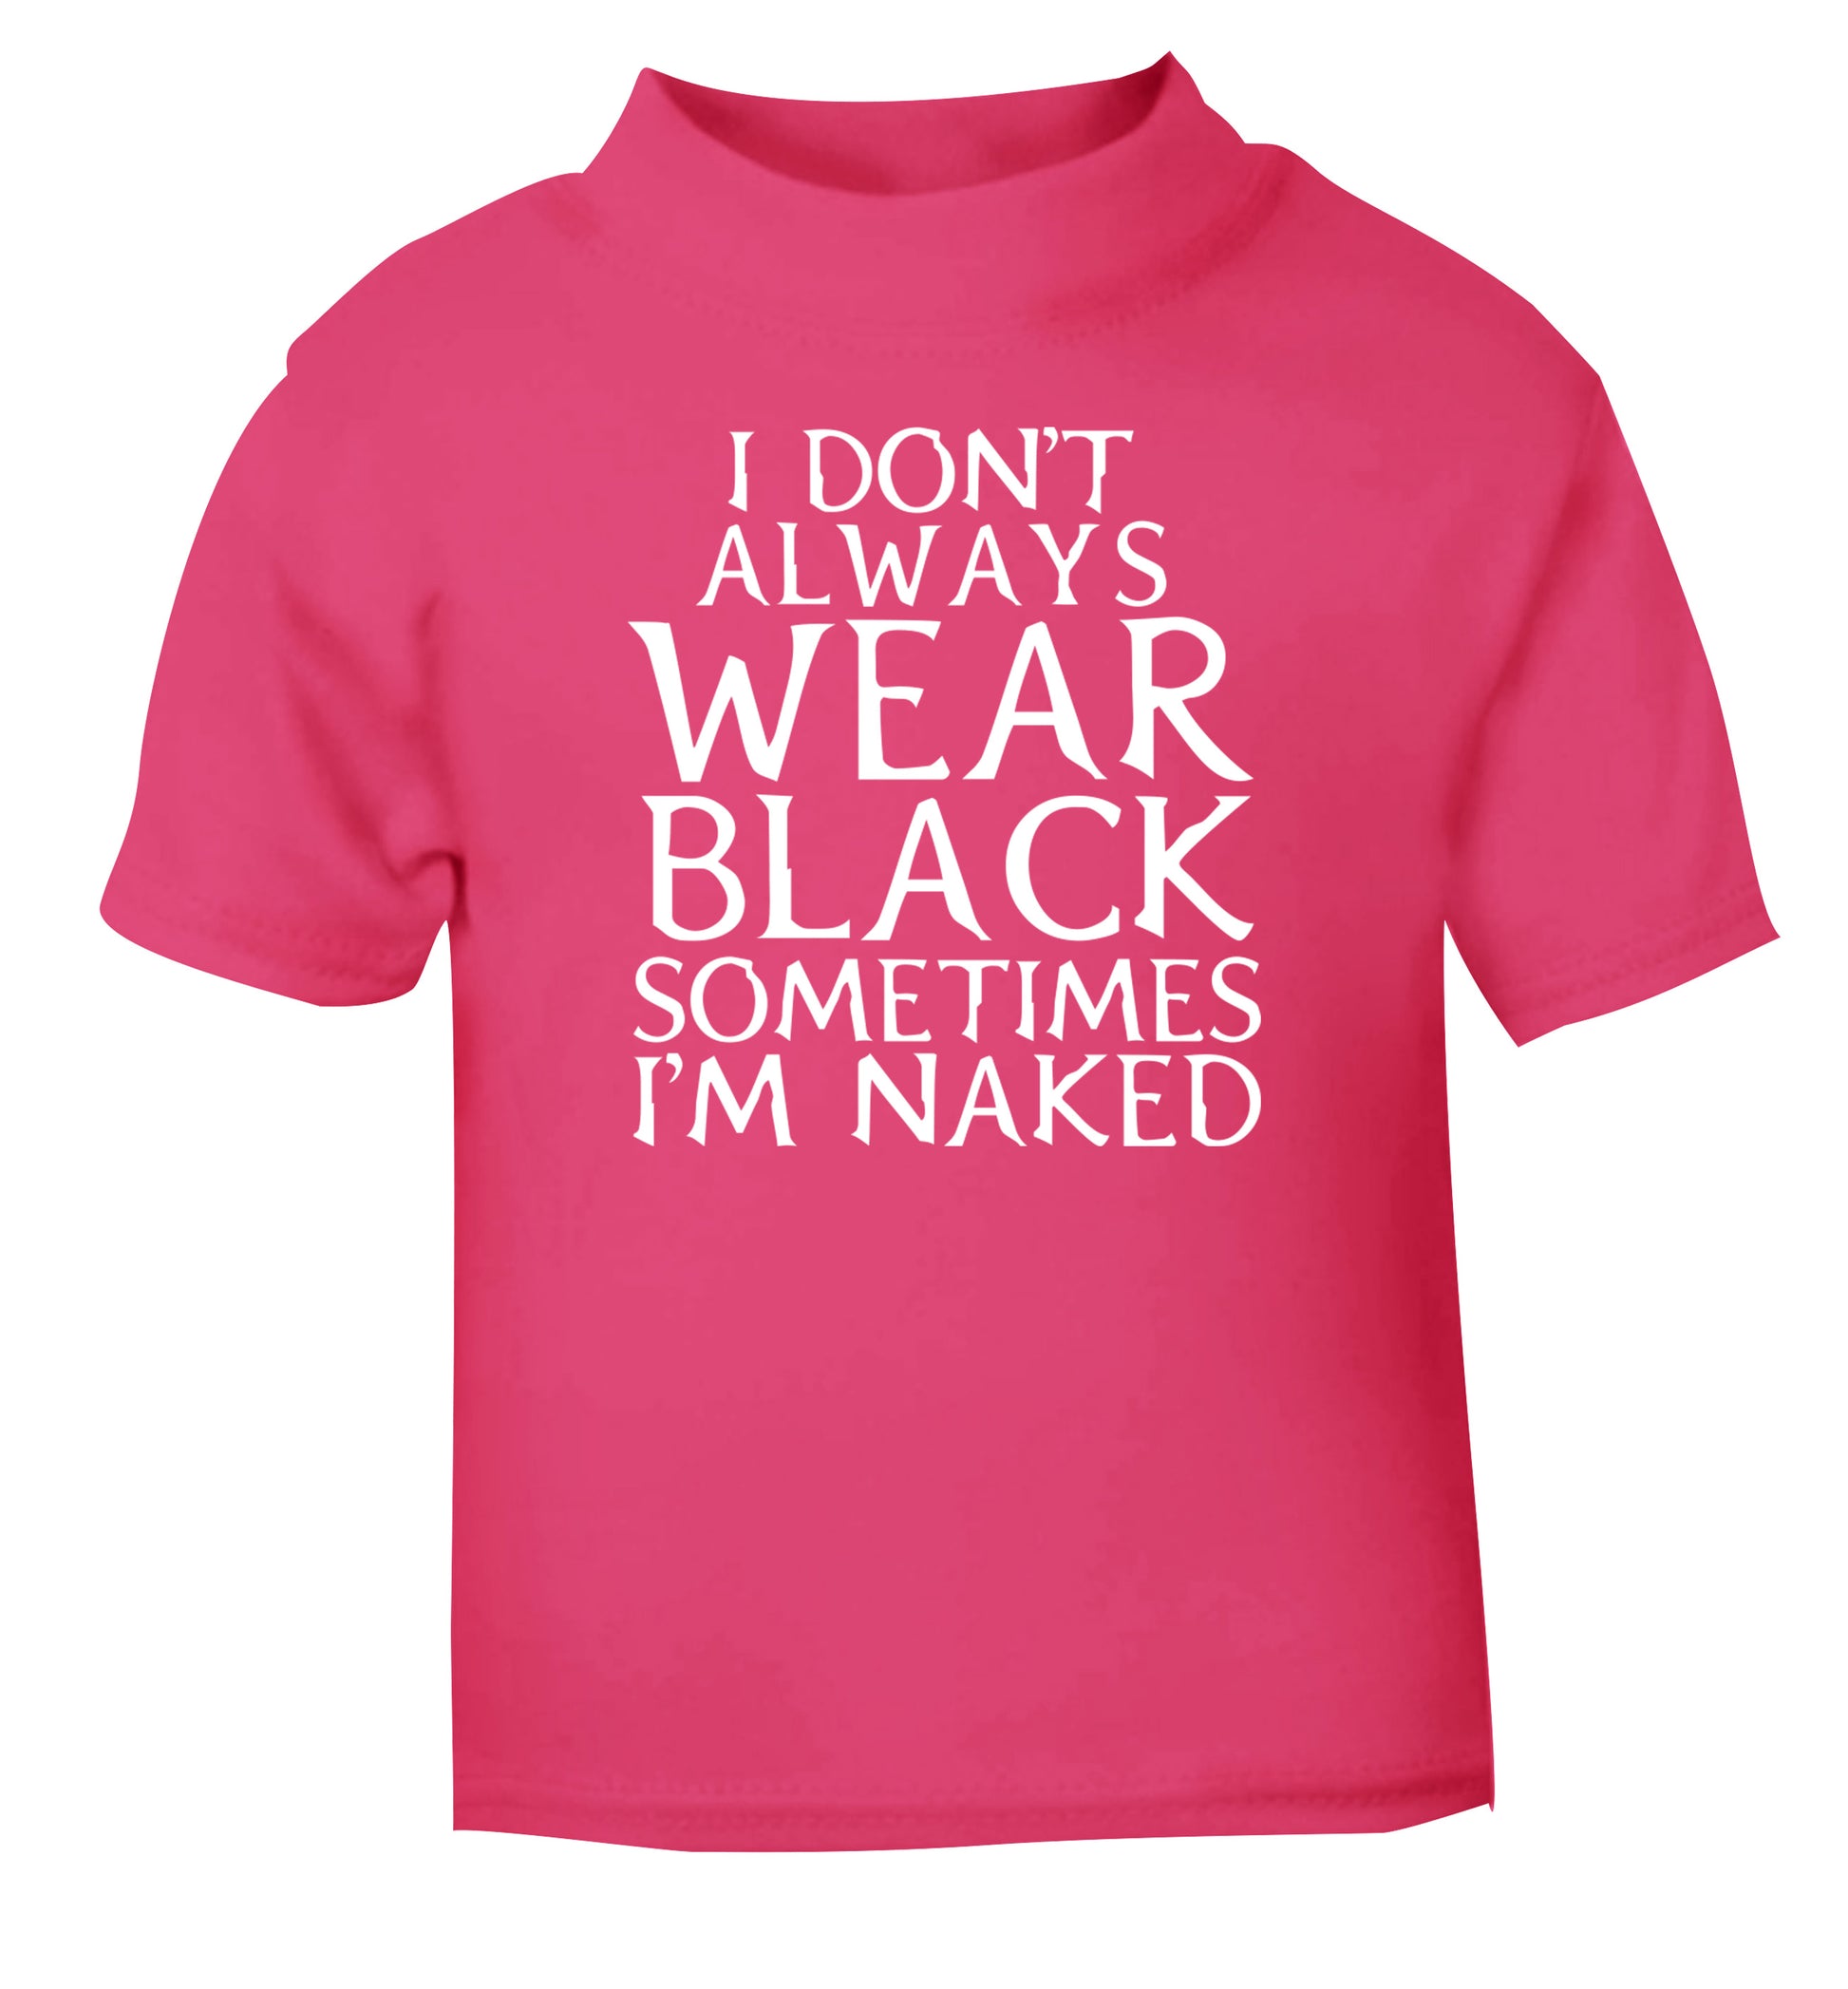 I don't always wear black sometimes I'm naked pink Baby Toddler Tshirt 2 Years